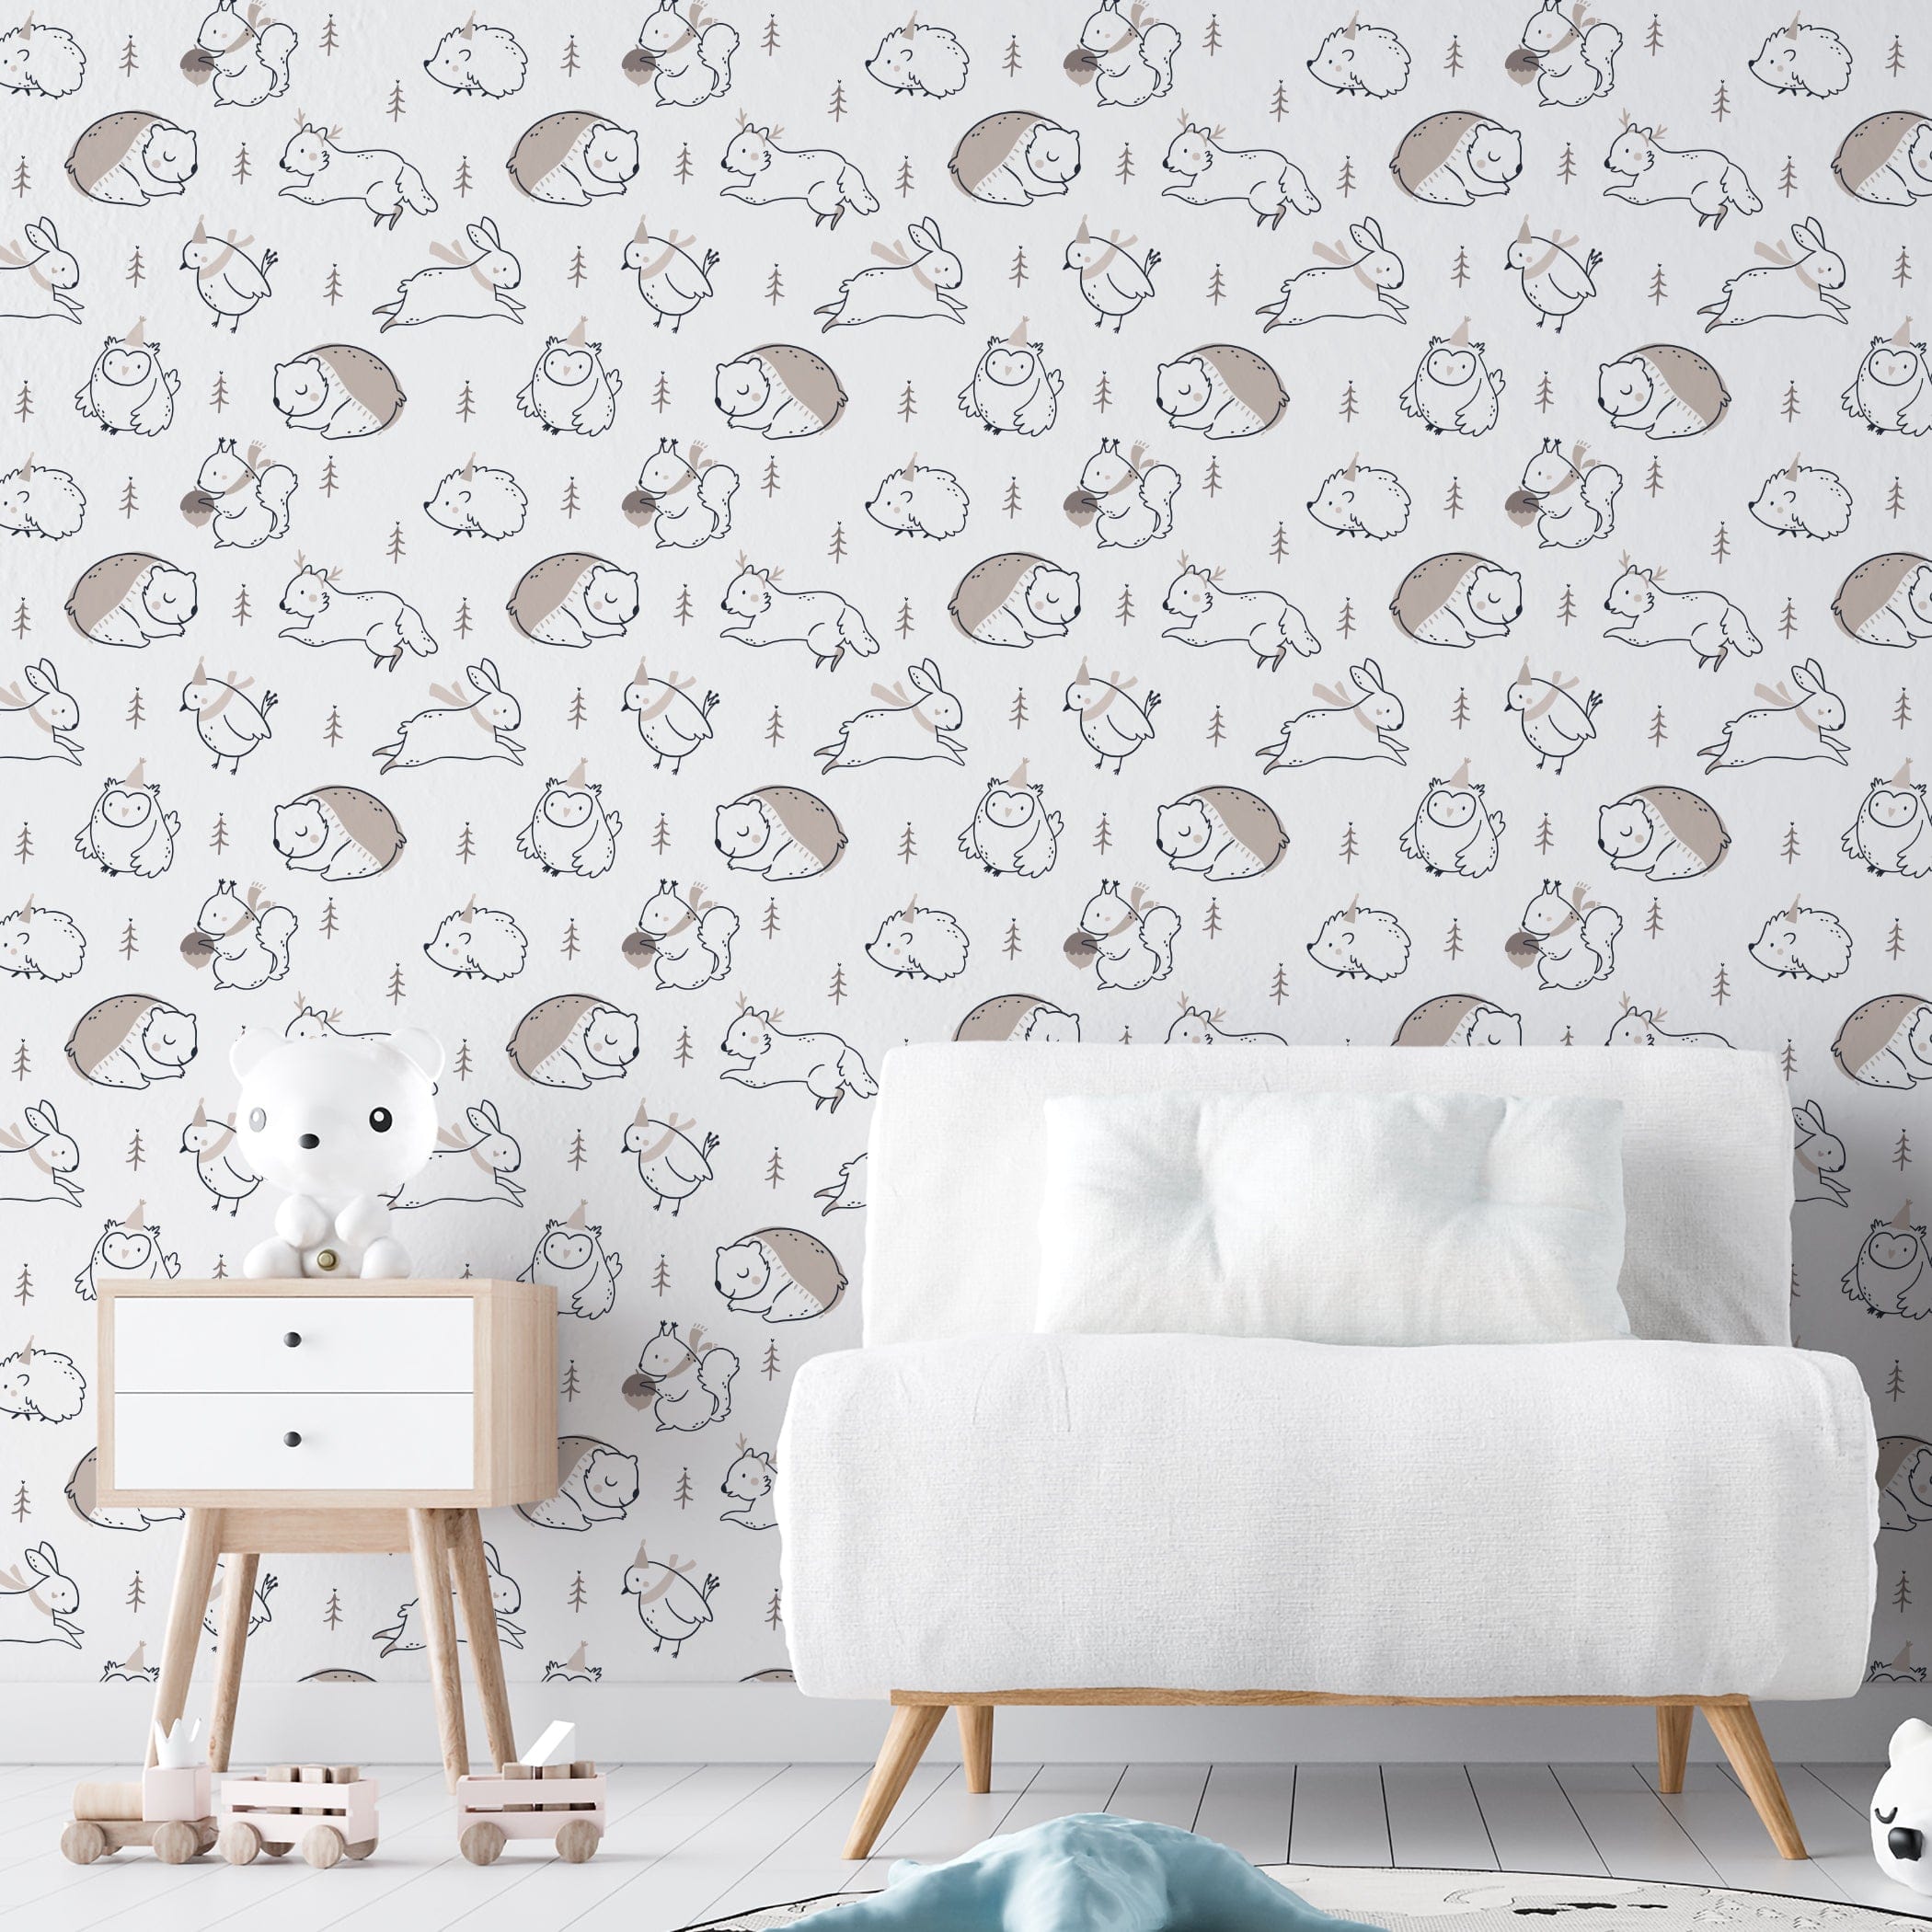 Winter Friends Wallpaper decorating a children's room, showing whimsical woodland creatures in soft neutral colors with playful accessories, enhancing a modern nursery setup with a white crib and simple wooden furniture